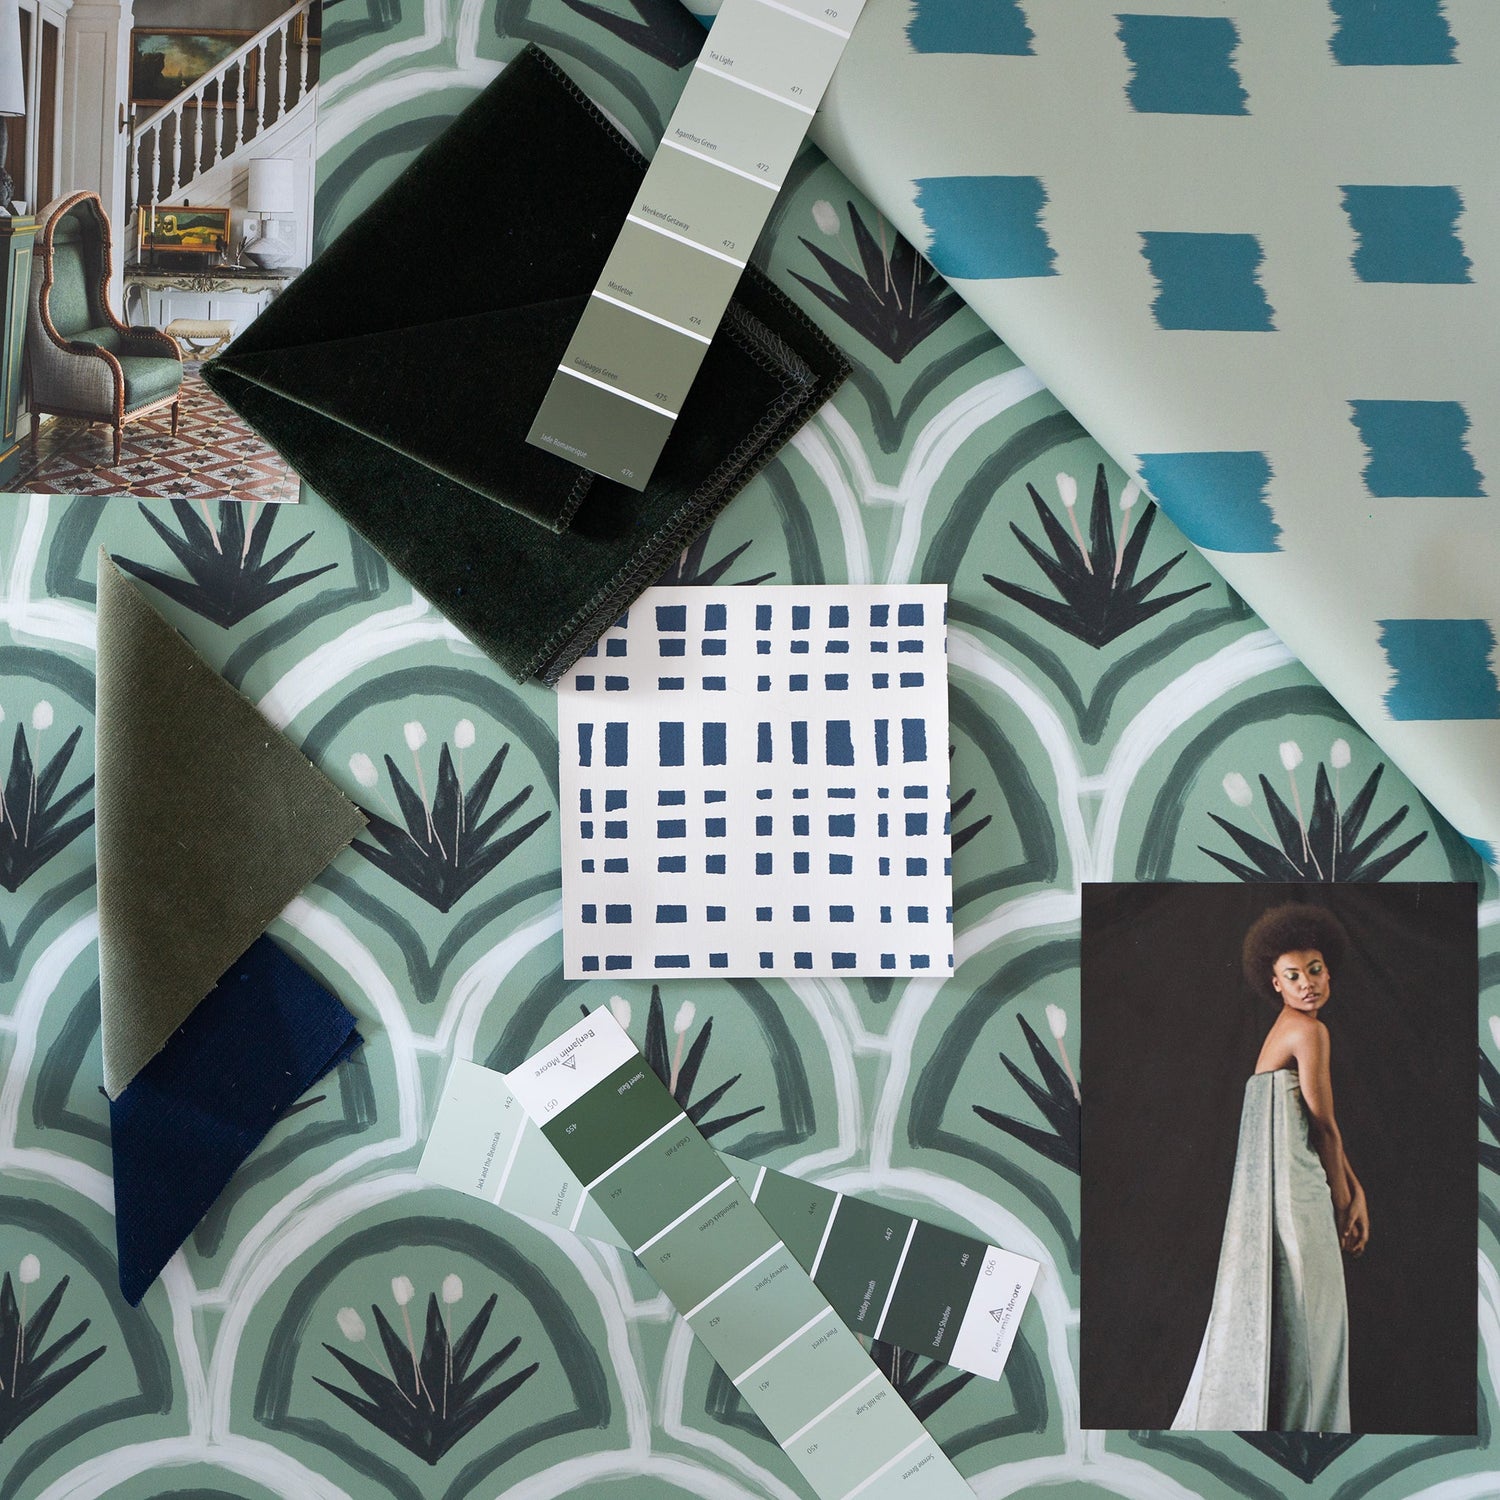 Interior design moodboard and fabric inspirations with Fern Green Velvet swatch, Navy Swatch, and Art Deco Palm Pattern Printed Swatch